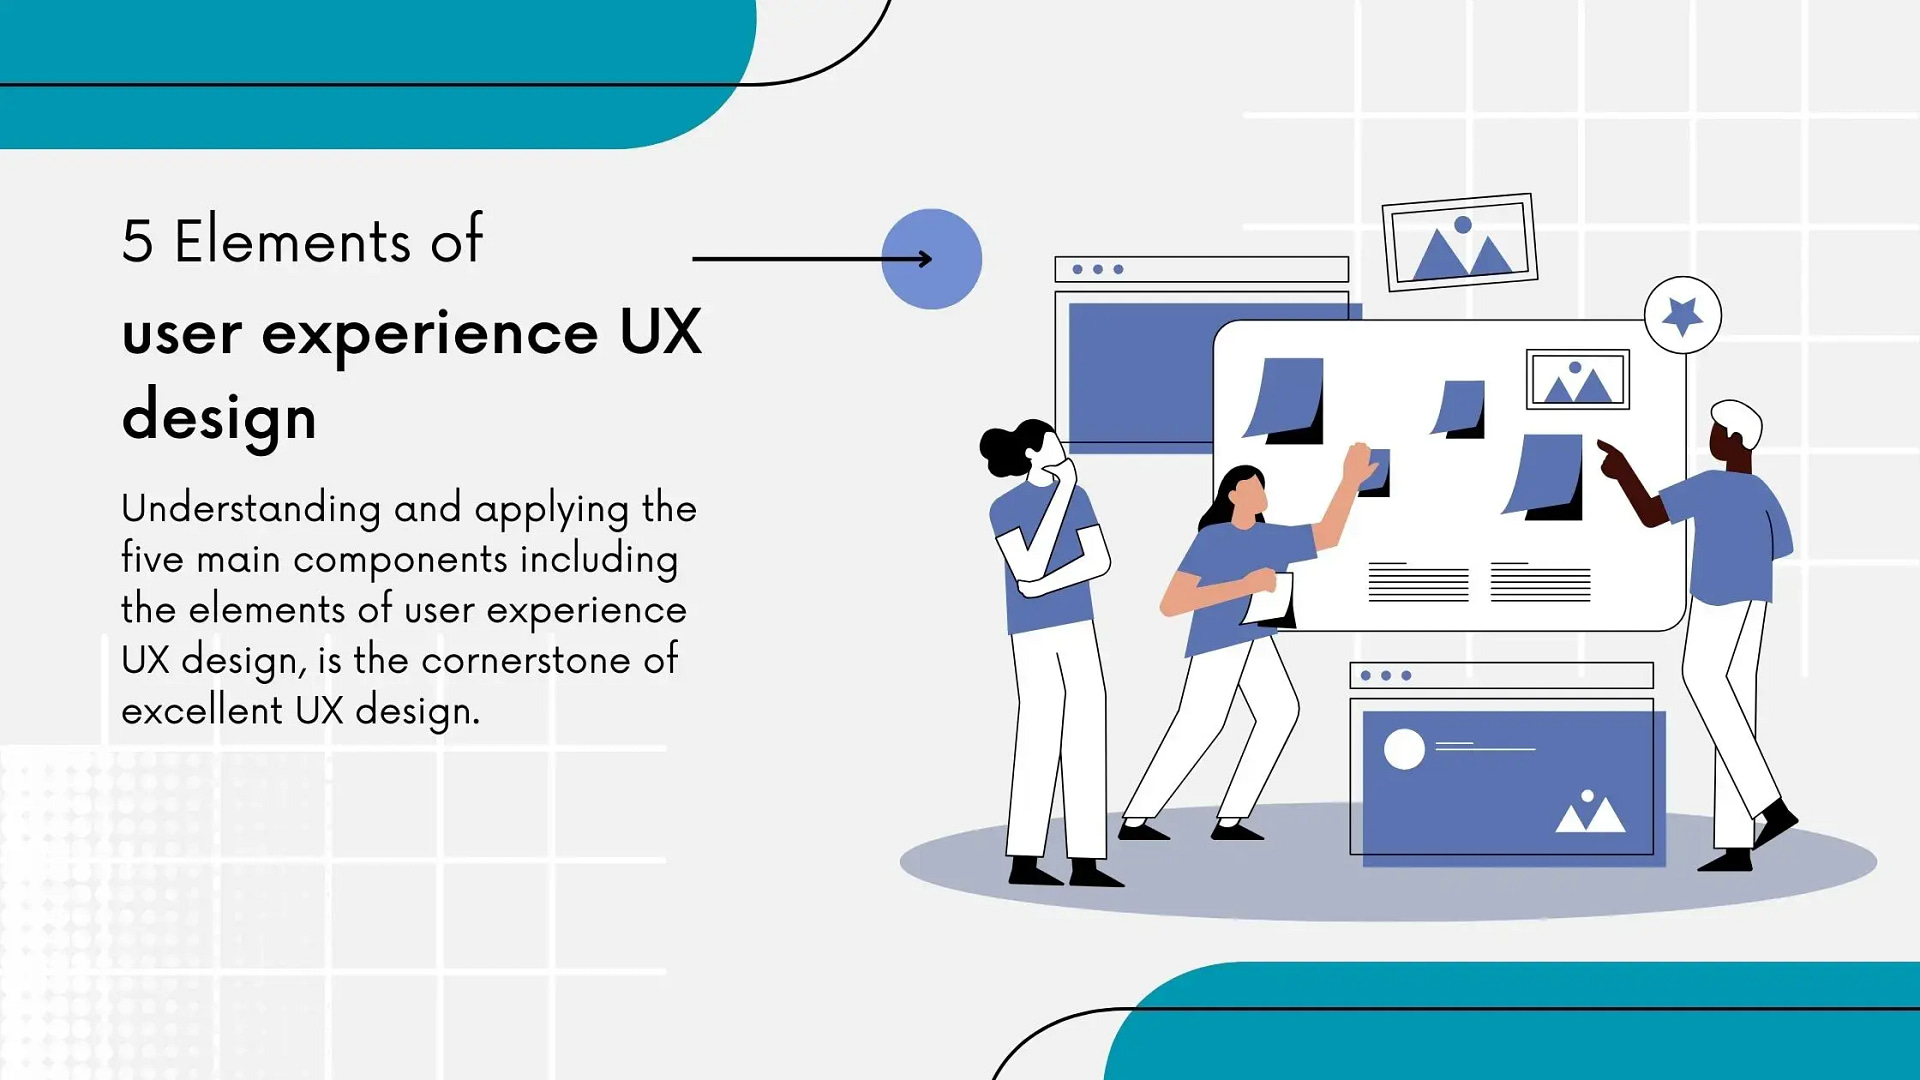 elements of user experience UX design